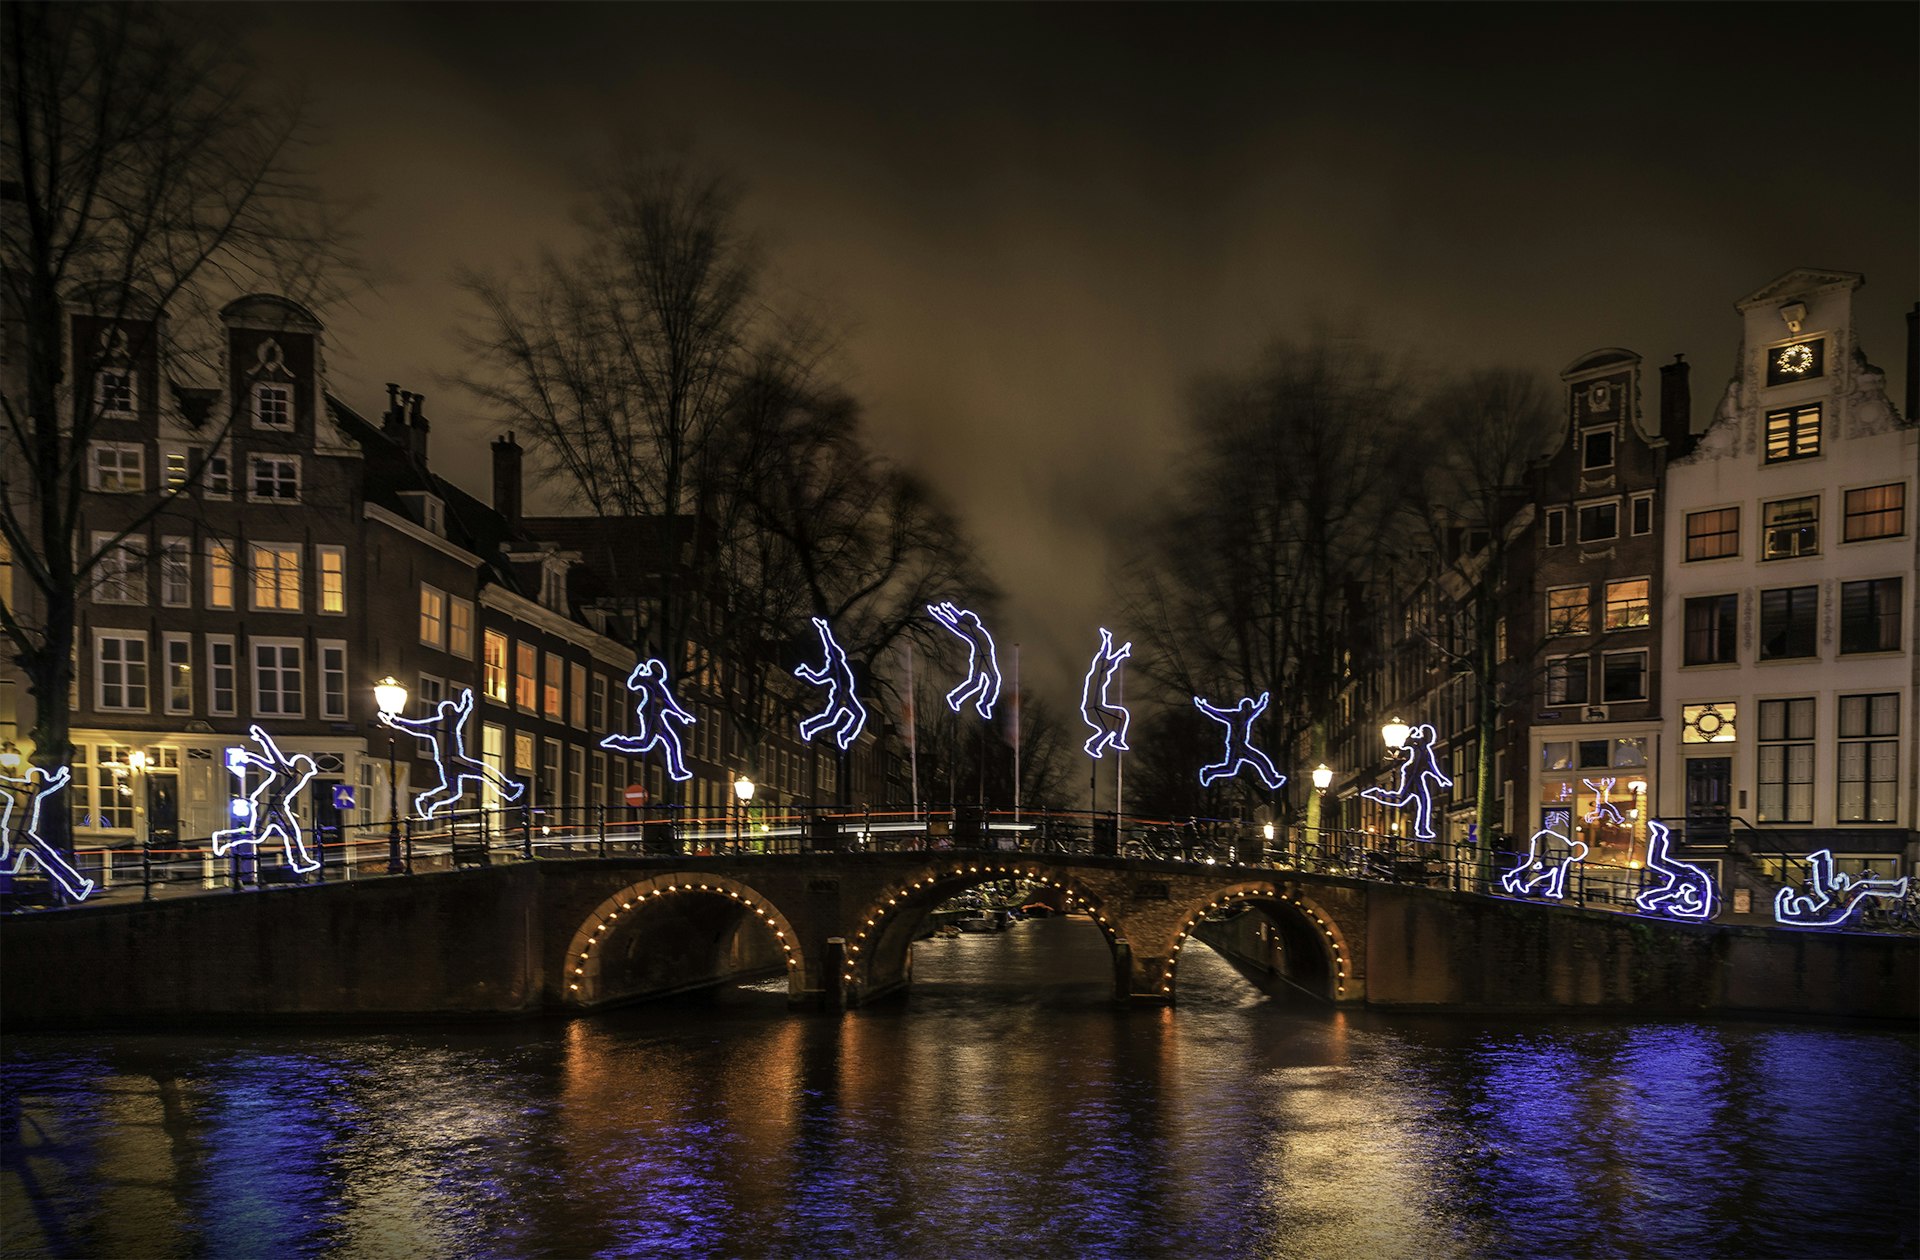 A canal bridge lit up for the Amsterdam Light Festival